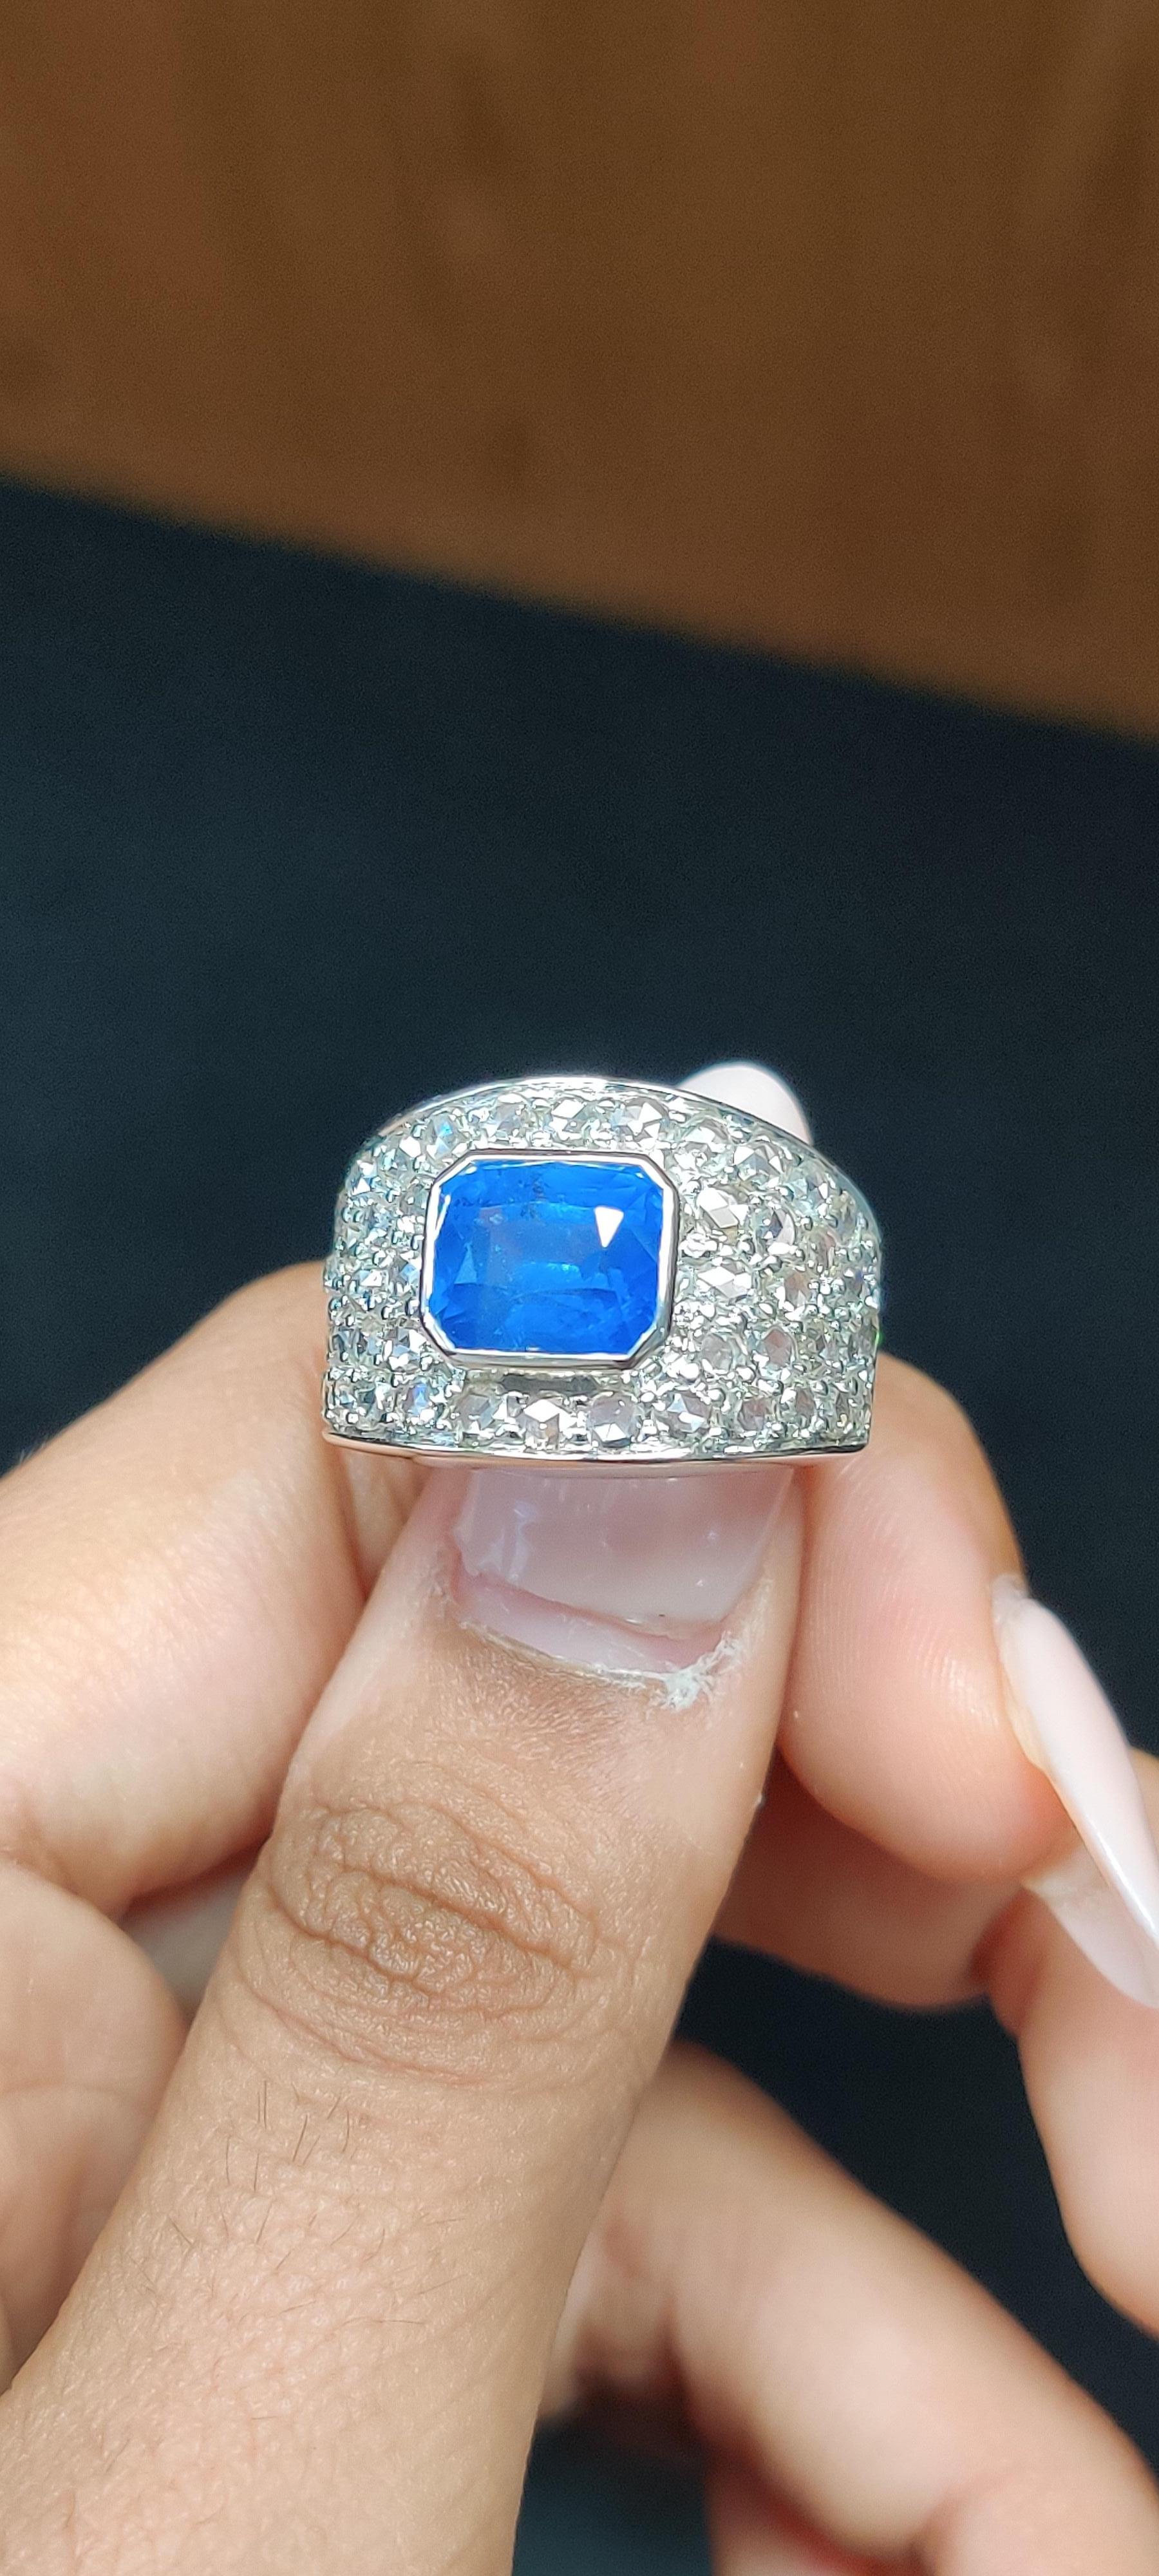 Men's 3.56 Carat Ceylon Sapphire Ring with Rose Cut Diamonds in 14k White Gold  For Sale 1